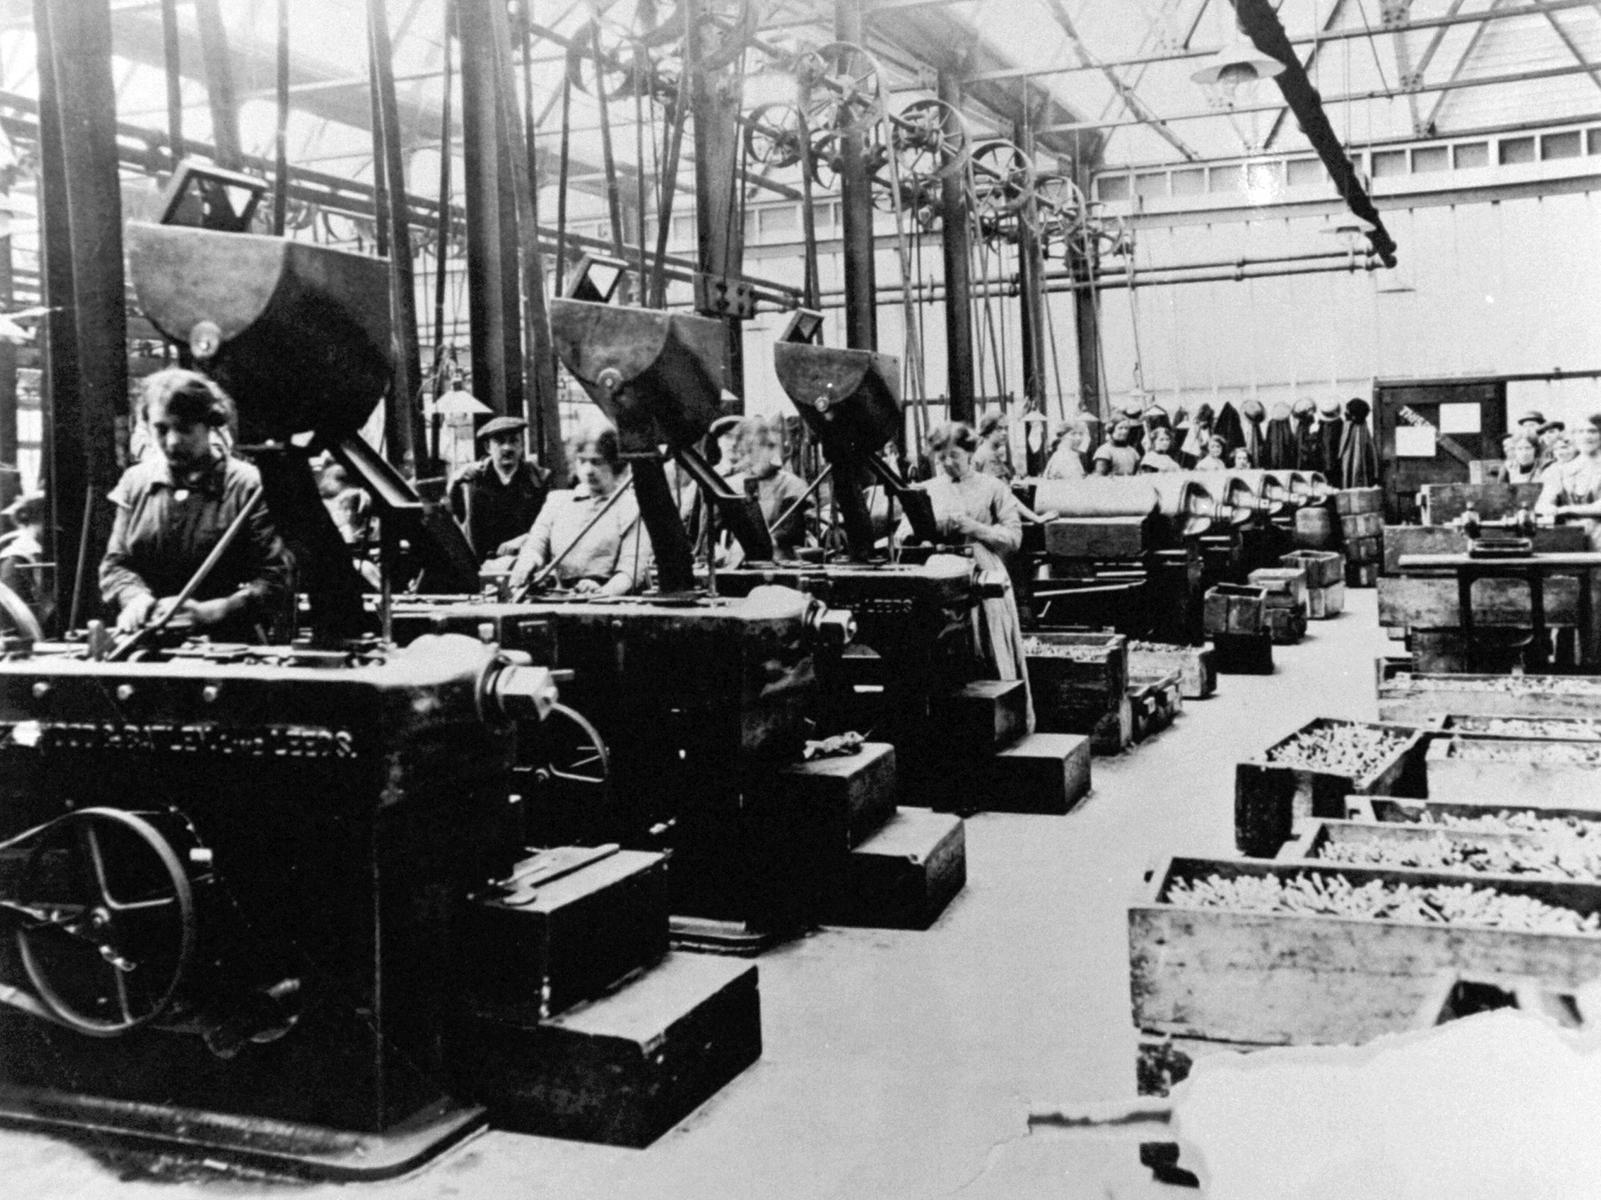 Inside the Barnbow Munitions Factory.